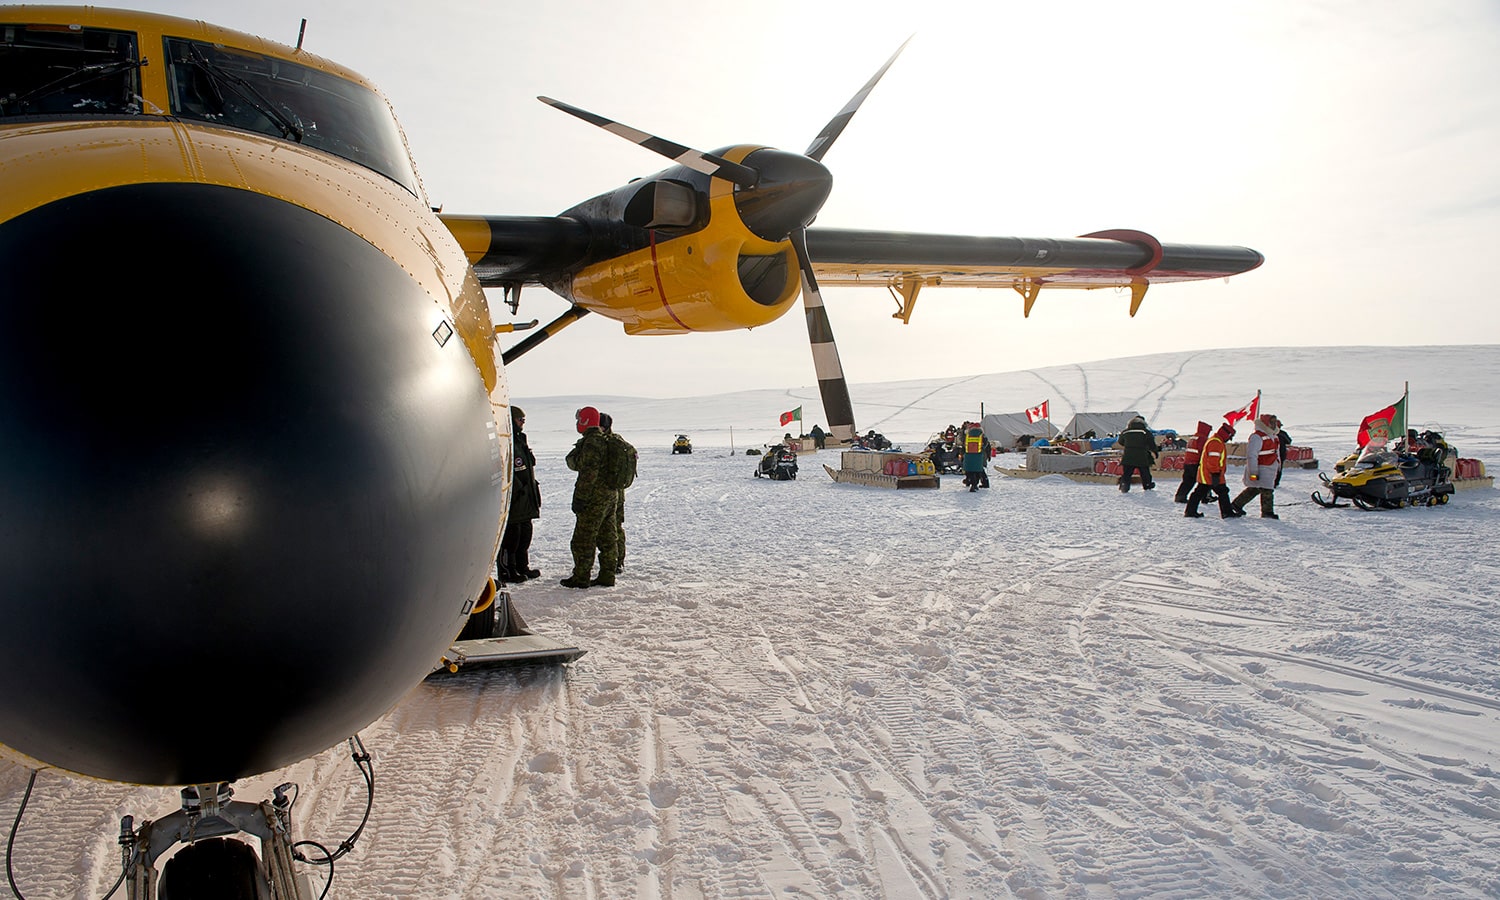 RCAF aircraft in an arctic location